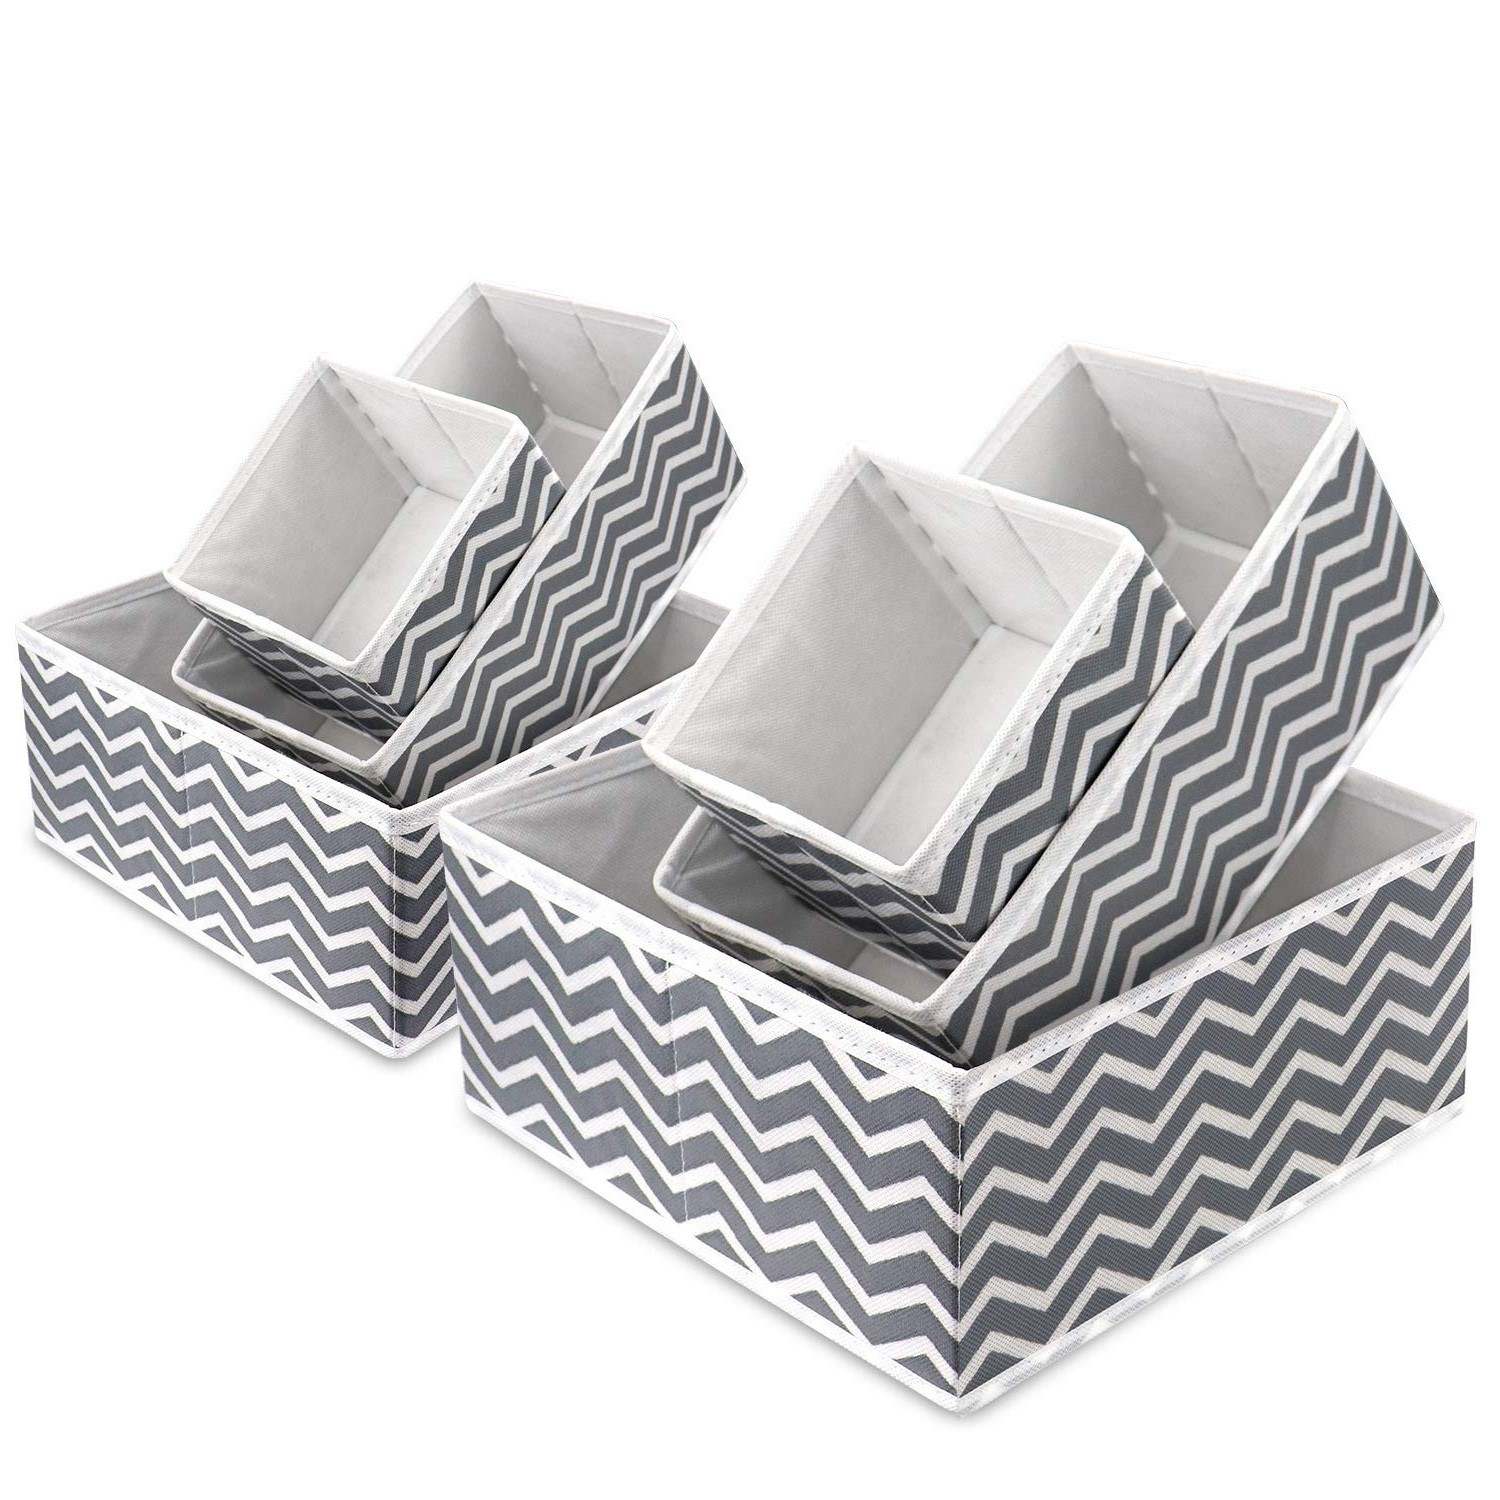 LMA 6 Piece Collapsible Cloth Storage Organizers - White Printed Grey